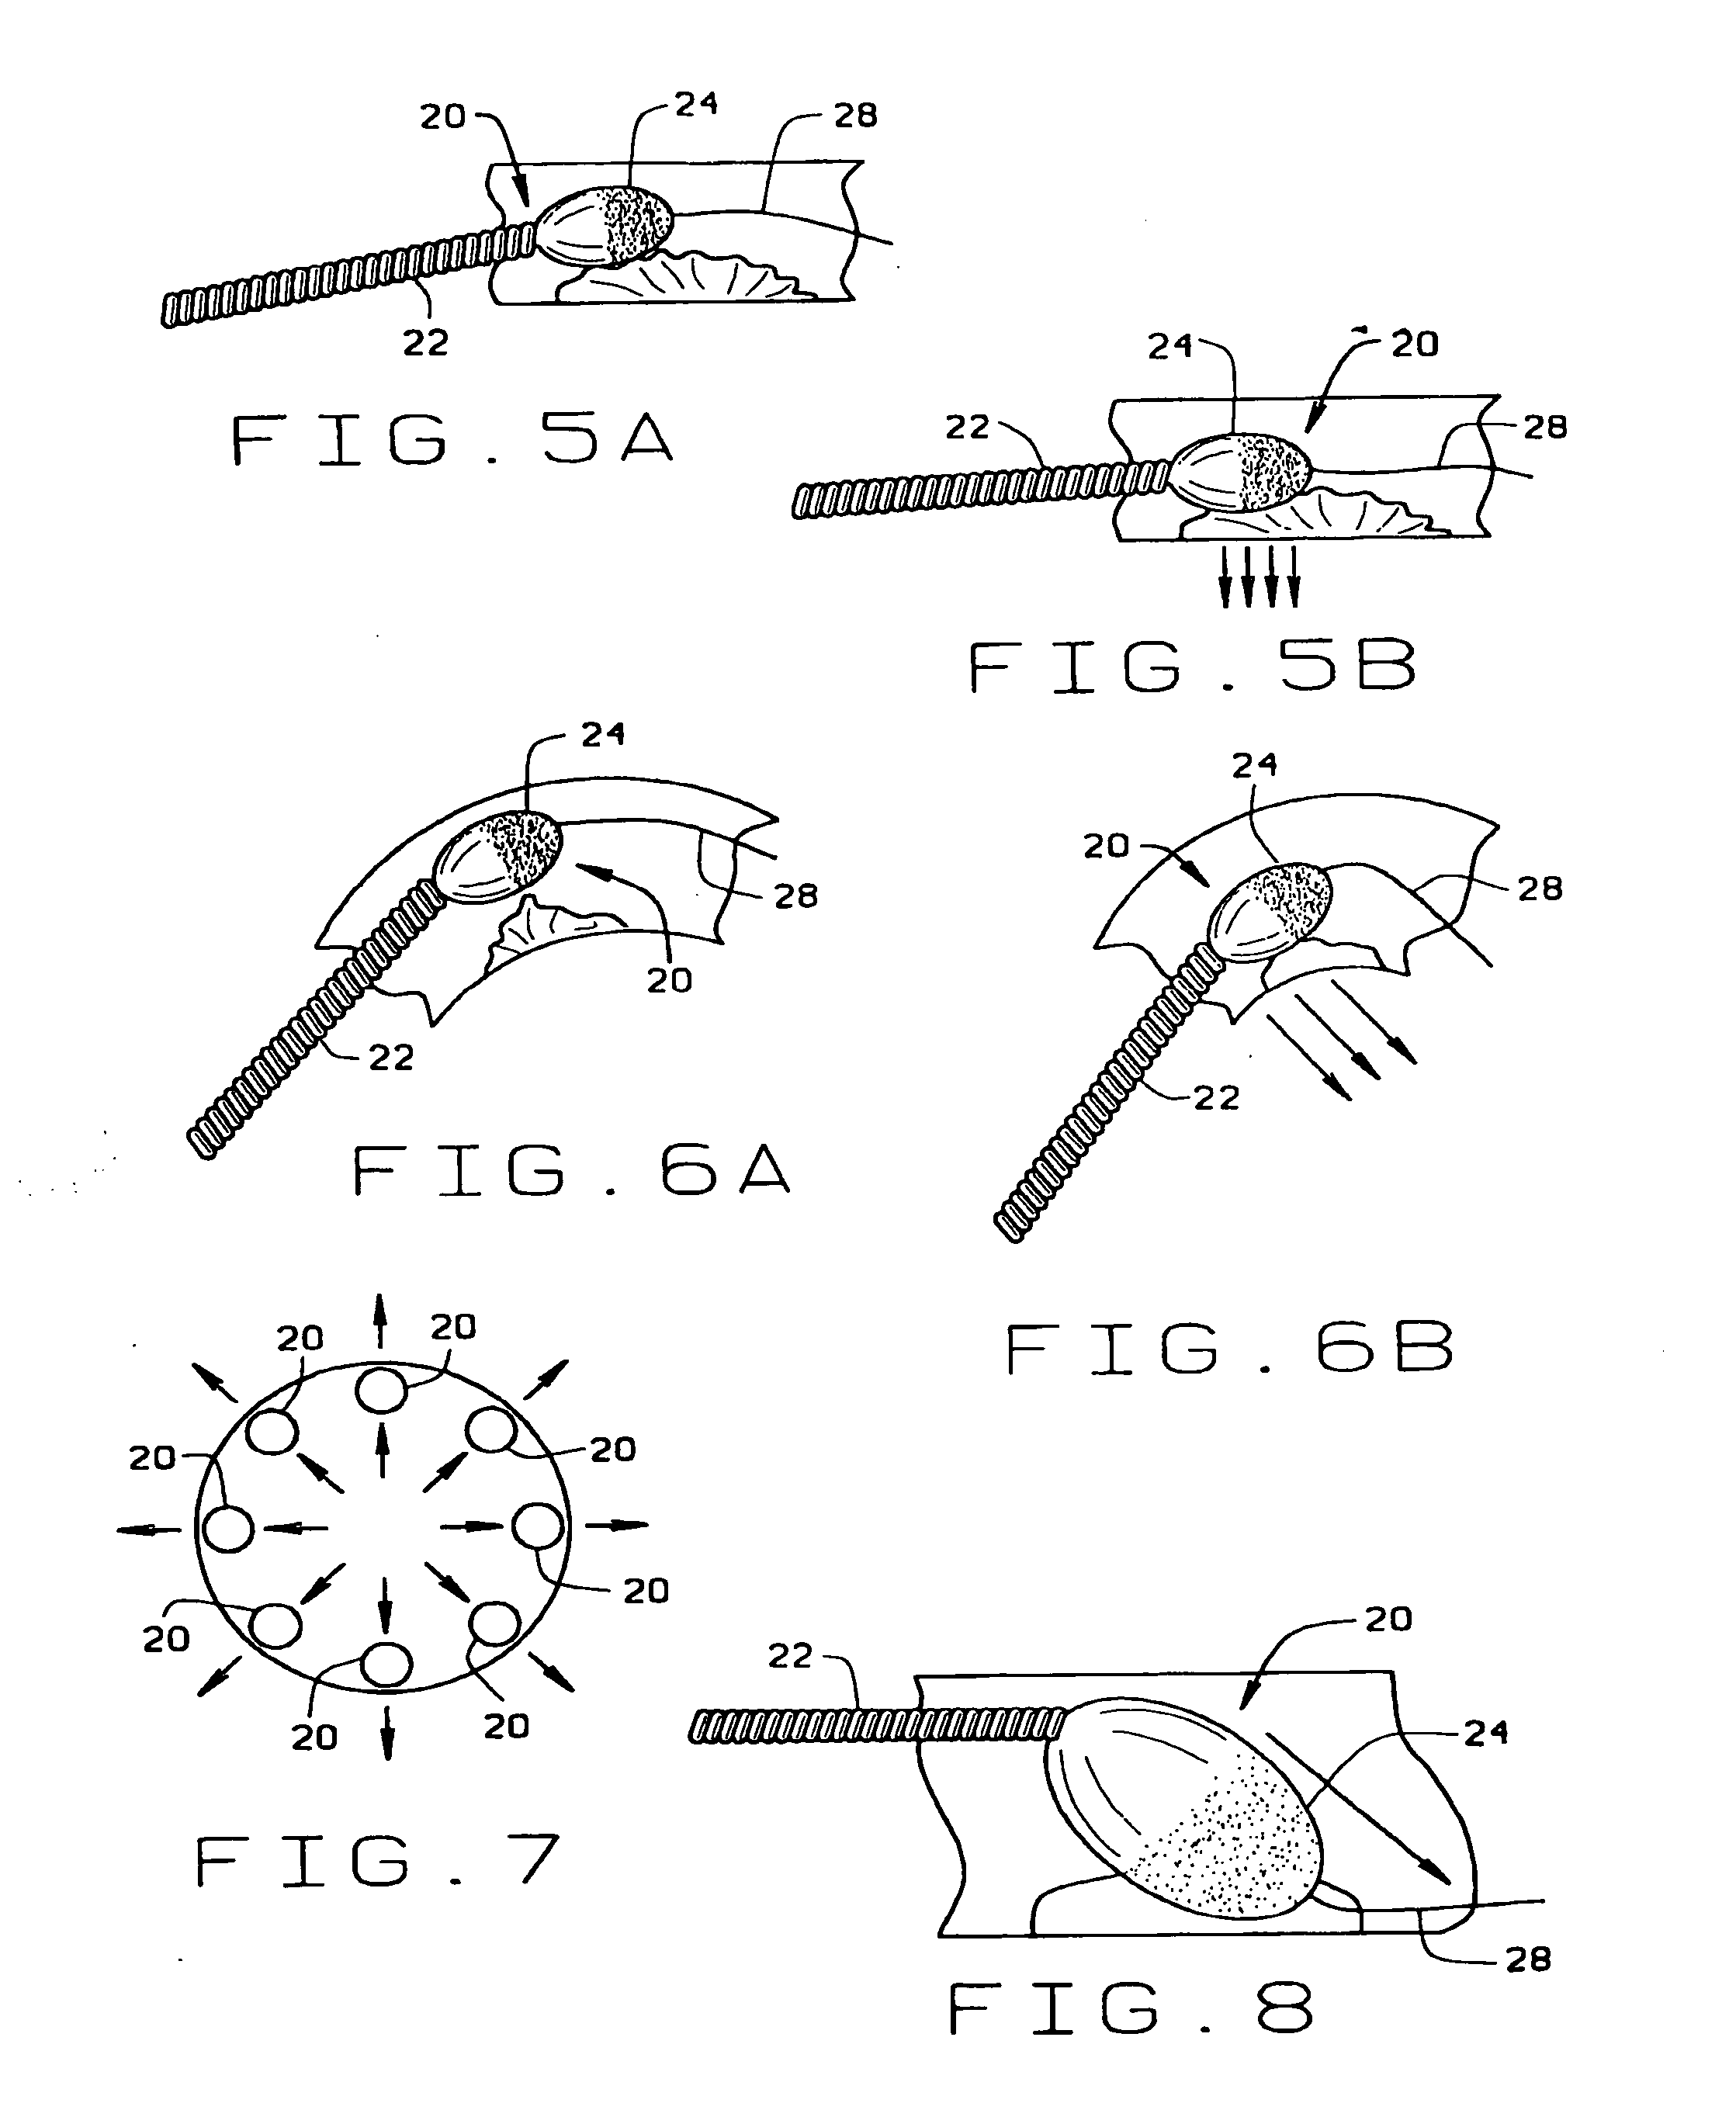 Magnetically navigable and/or controllable device for removing material from body lumens and cavities